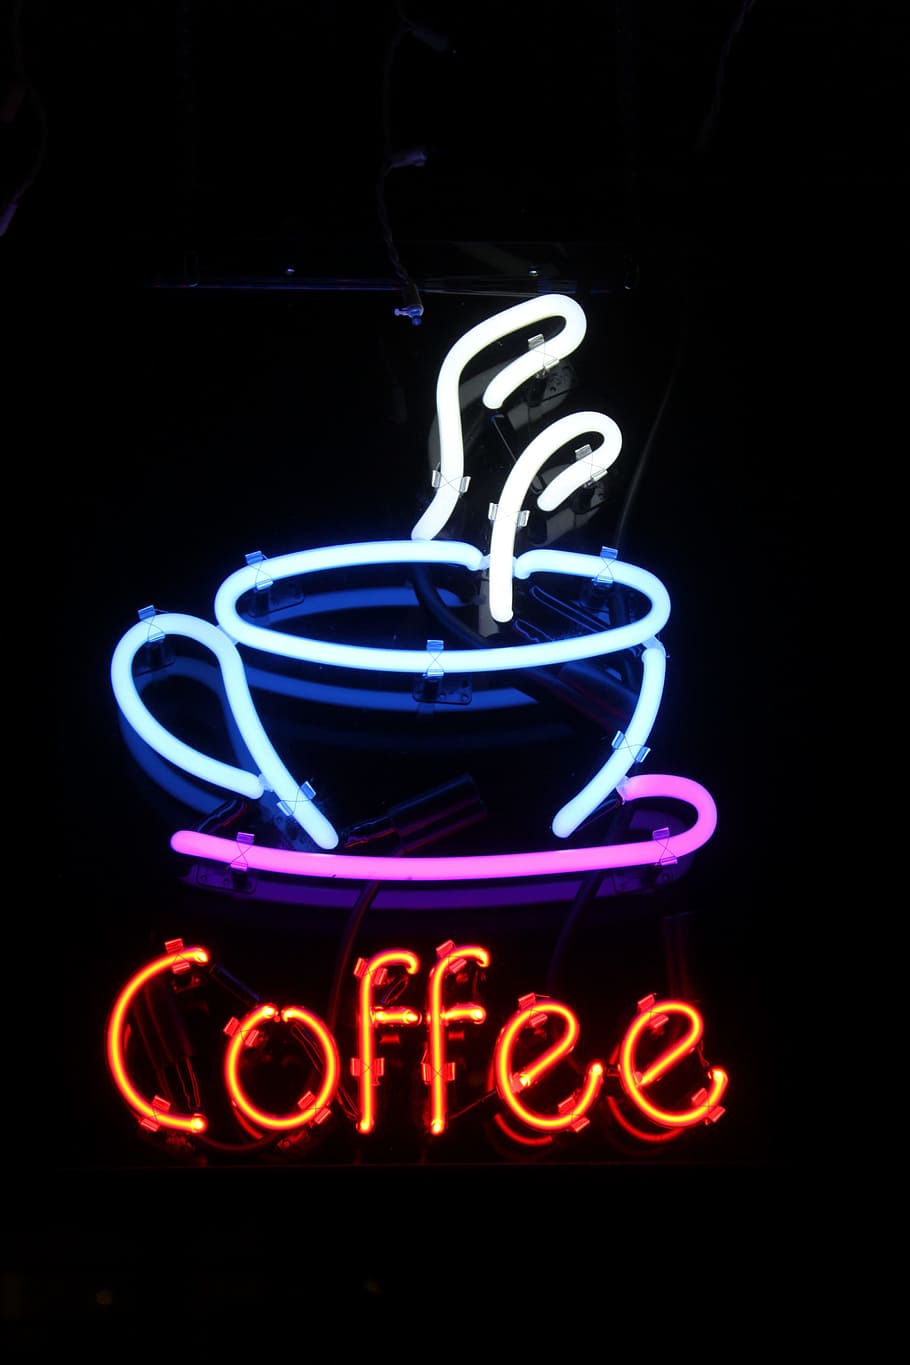 turned-on blue and multicolored Coffee neon signage, photo, neon light